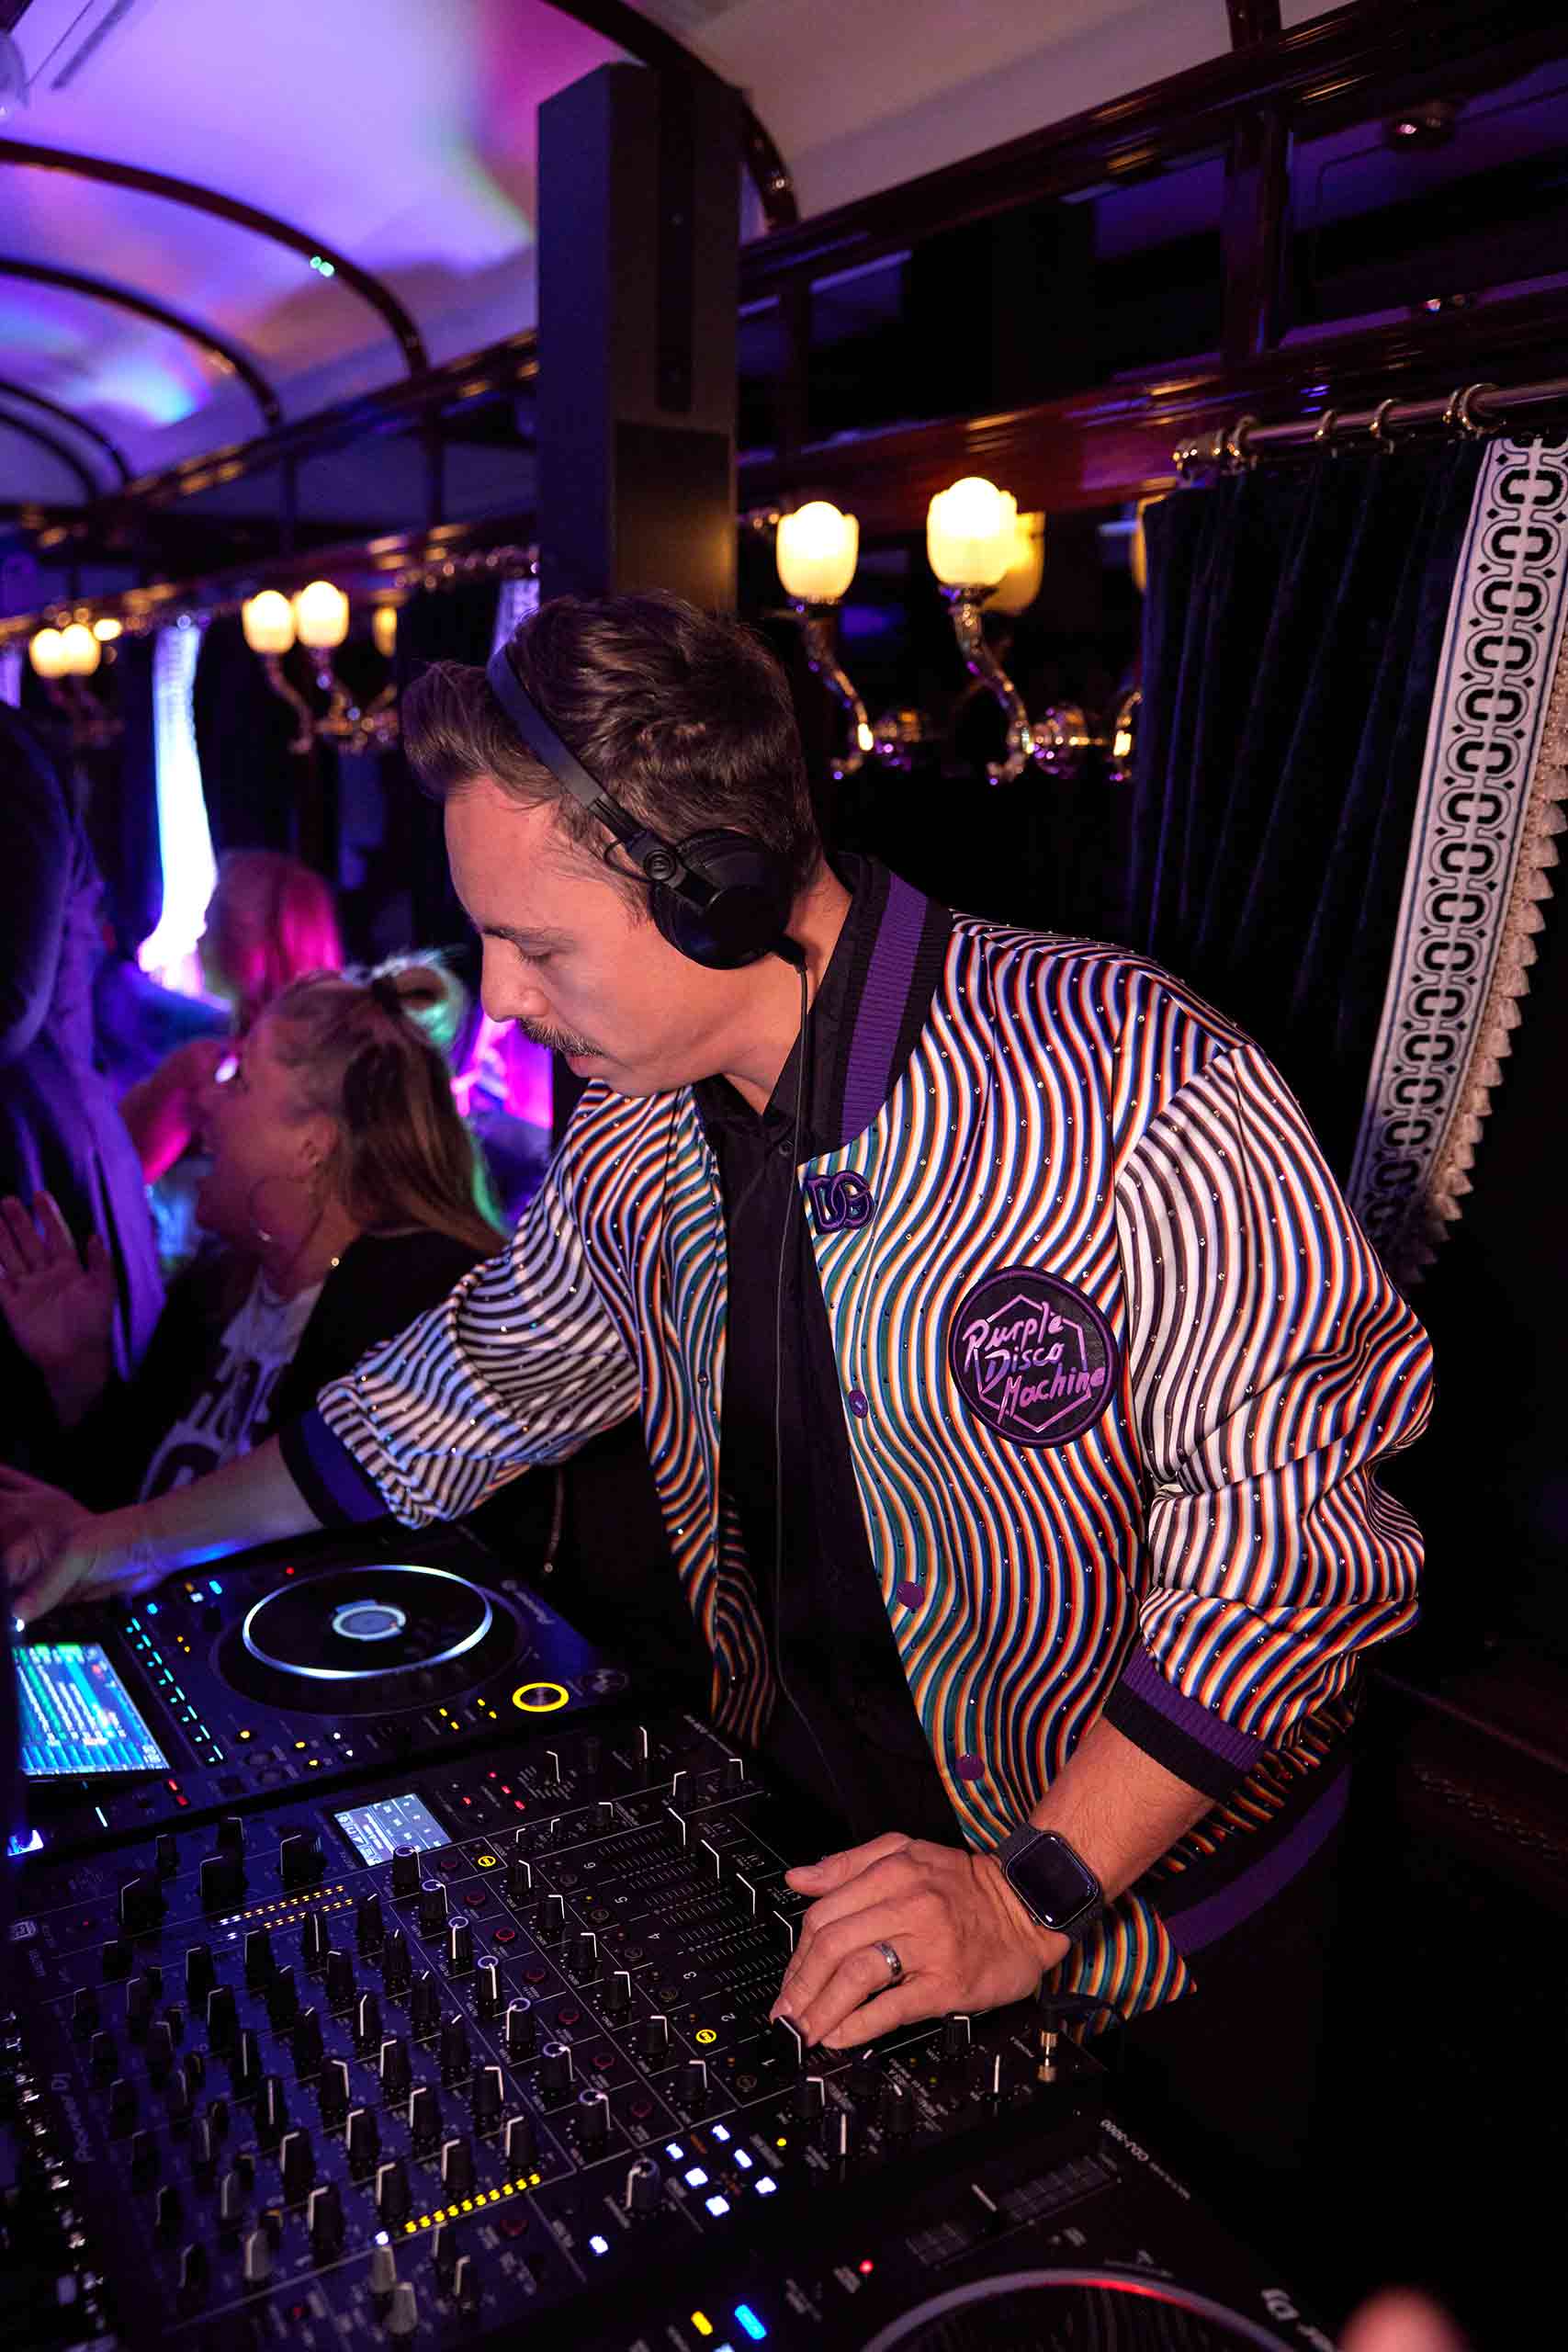 A DJ performs within the train carriage. 